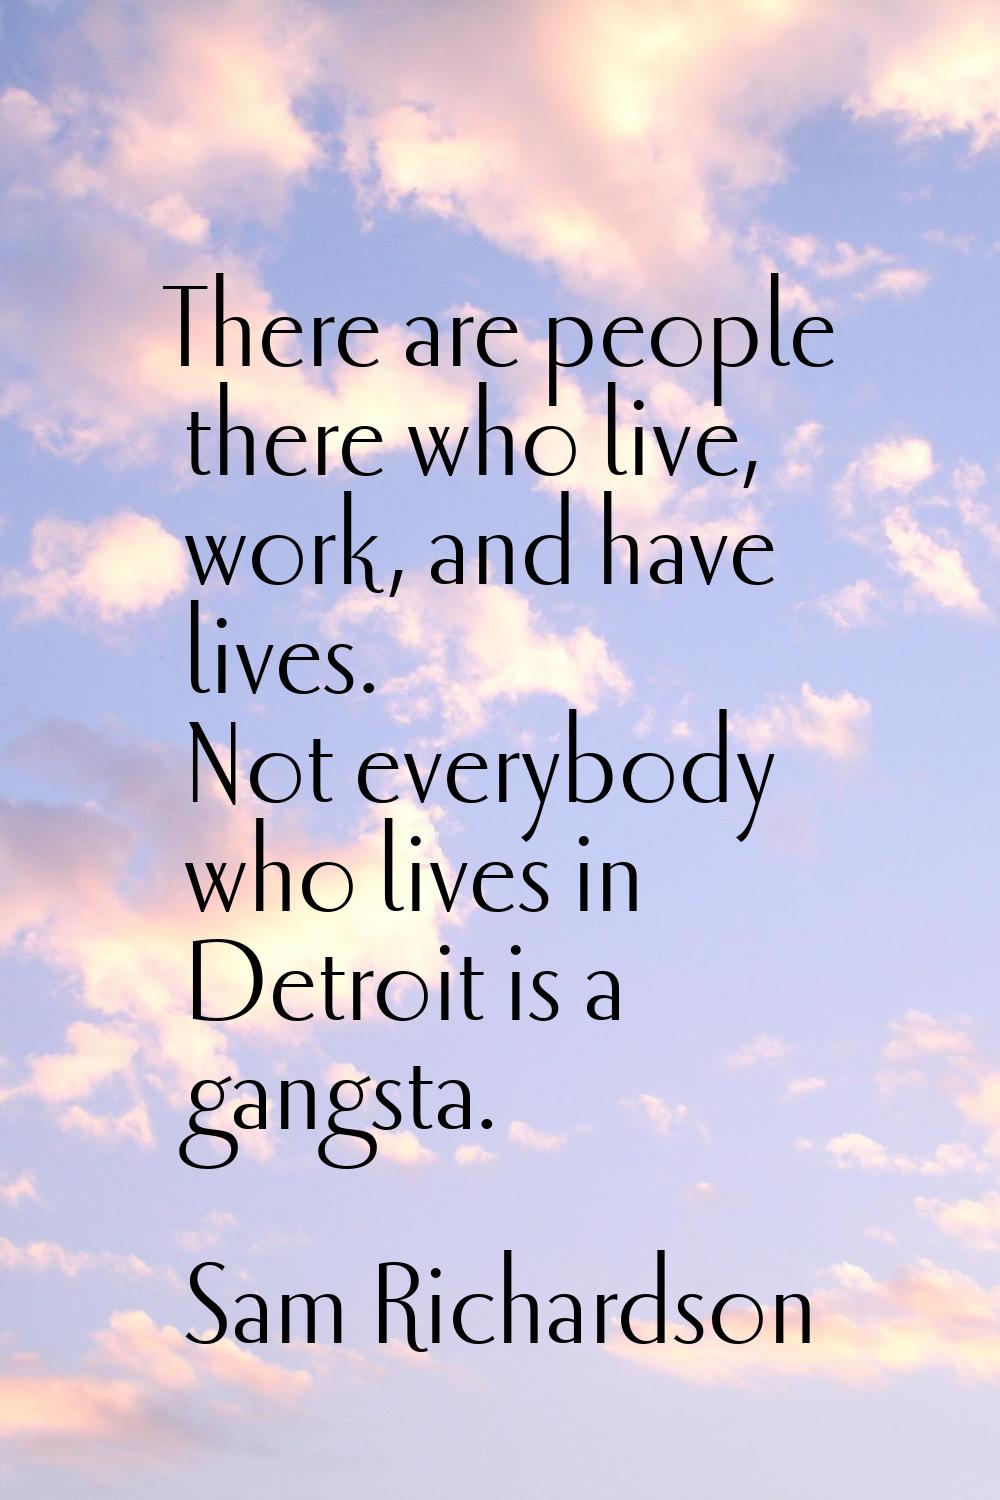 There are people there who live, work, and have lives. Not everybody who lives in Detroit is a gang